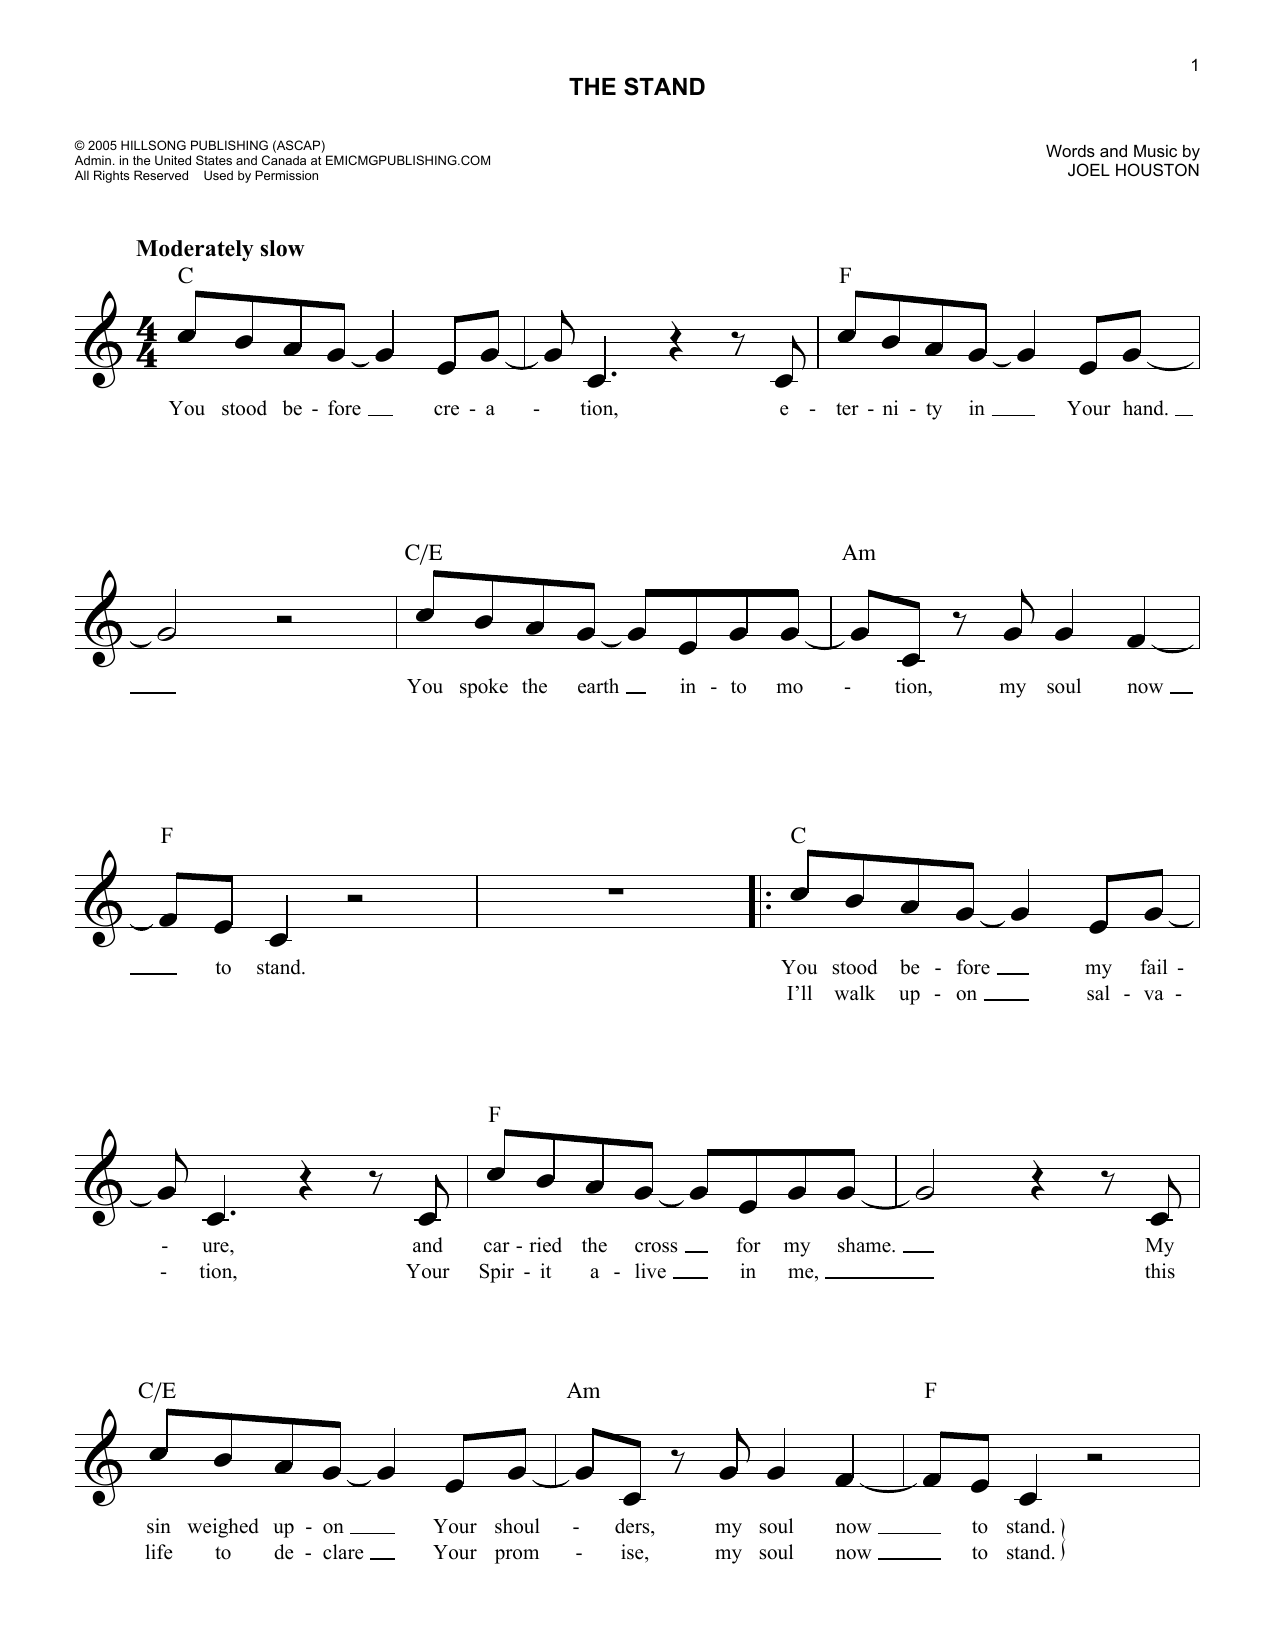 Download Joel Houston The Stand Sheet Music